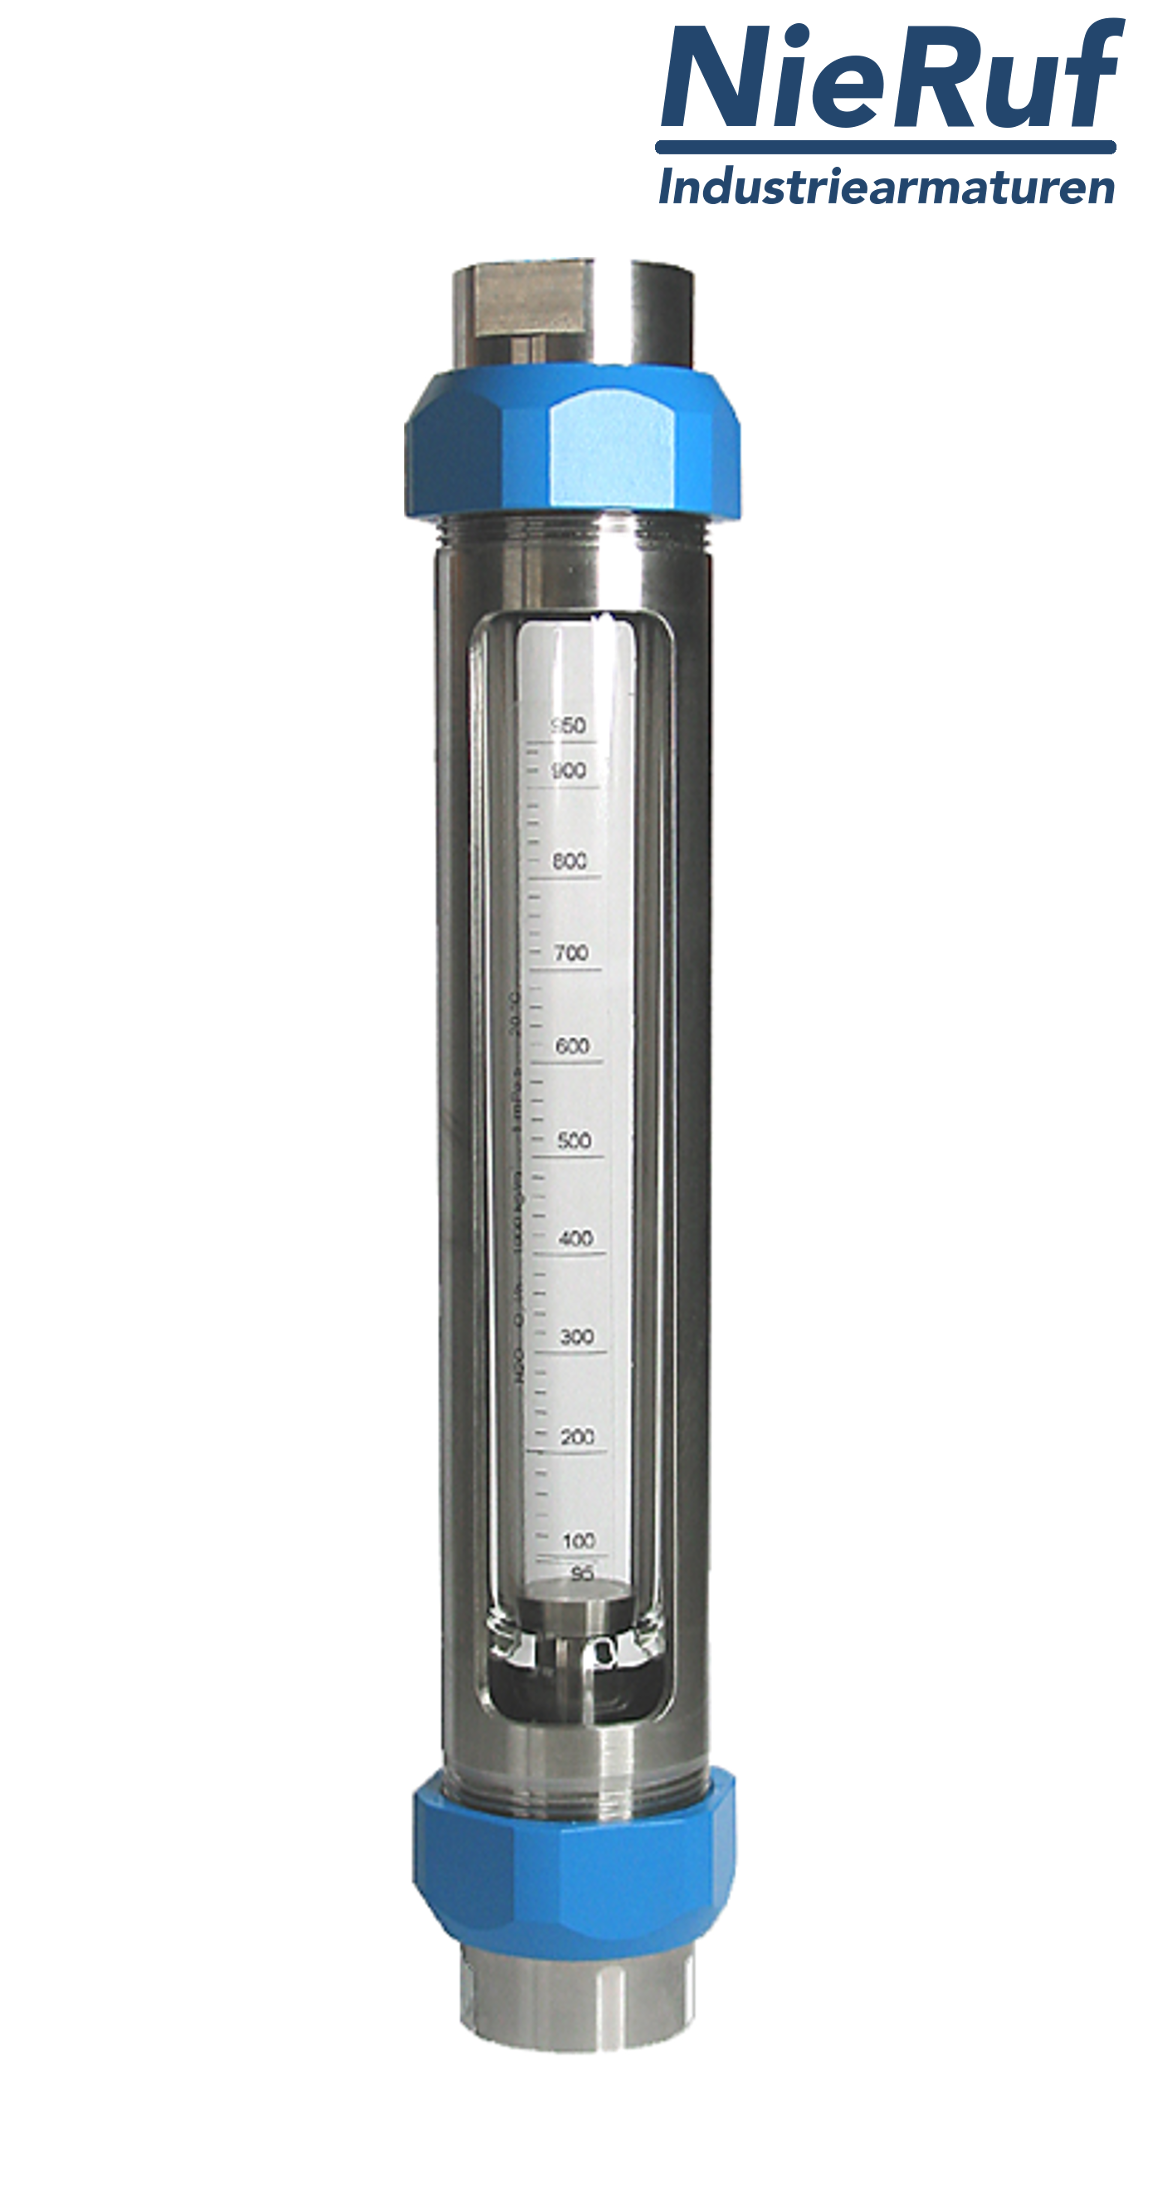 Variable area flowmeter stainless steel + borosilicate 3/4" inch 160.0 - 1600 l/h water EPDM